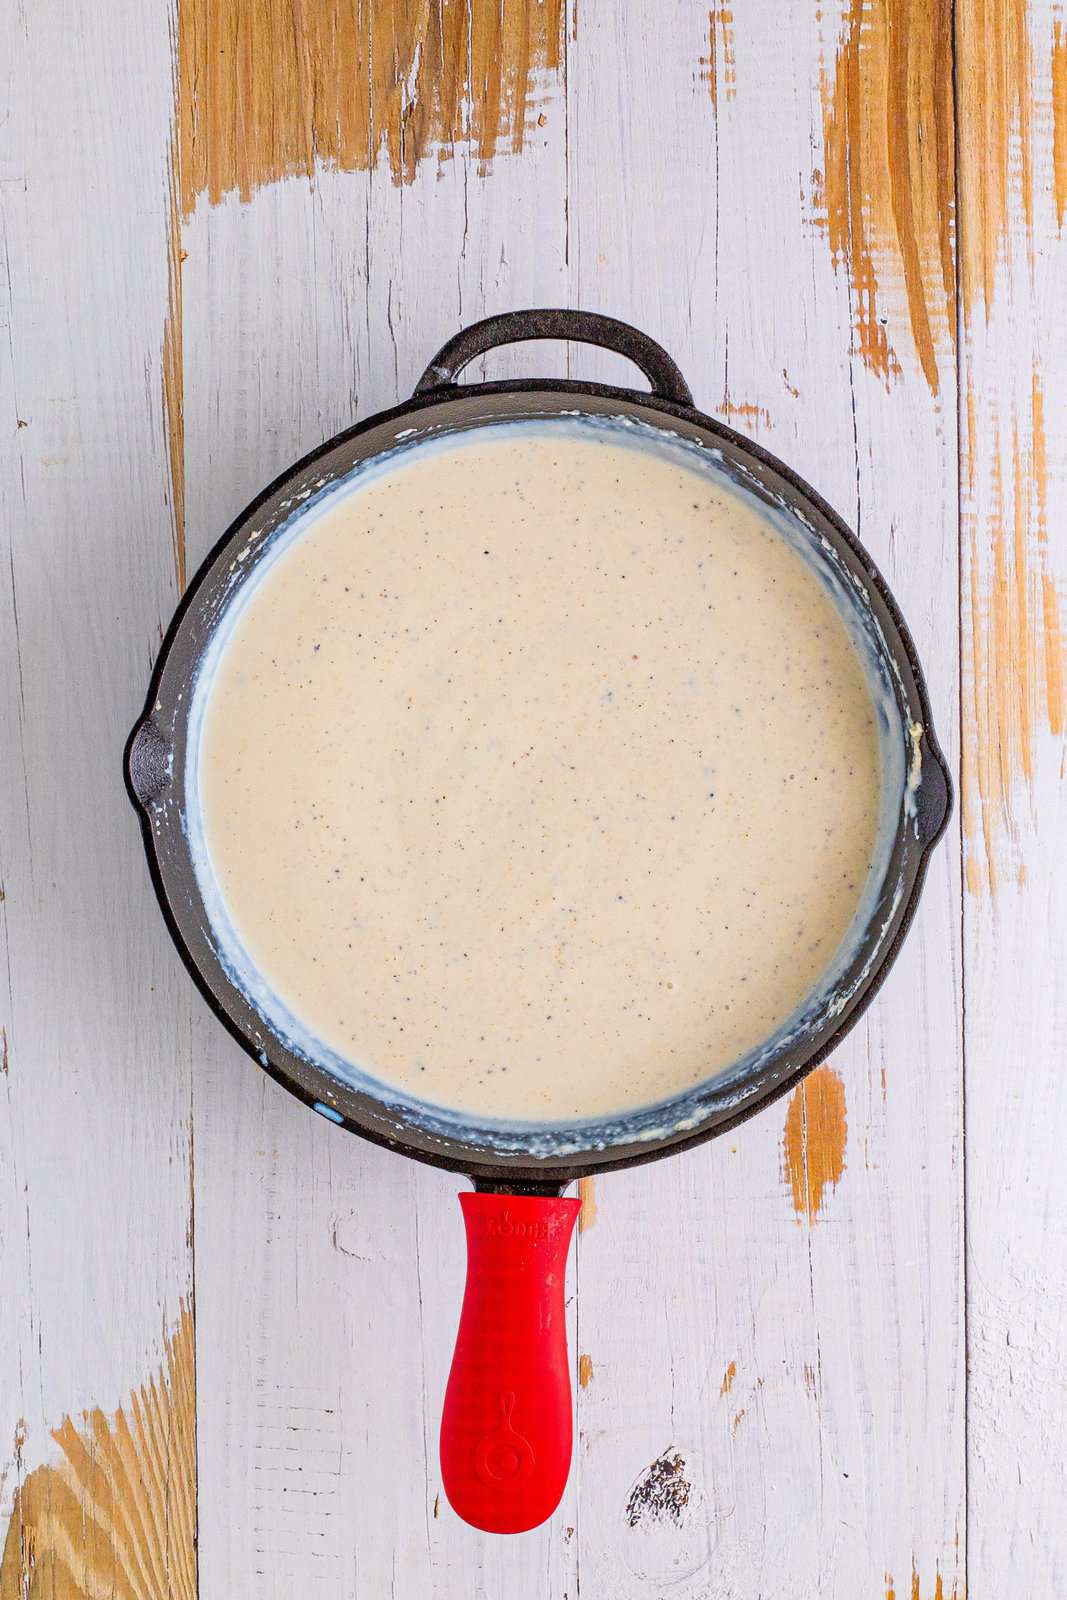 Milk, salt and pepper whisked into the flour mixture to create gravy.